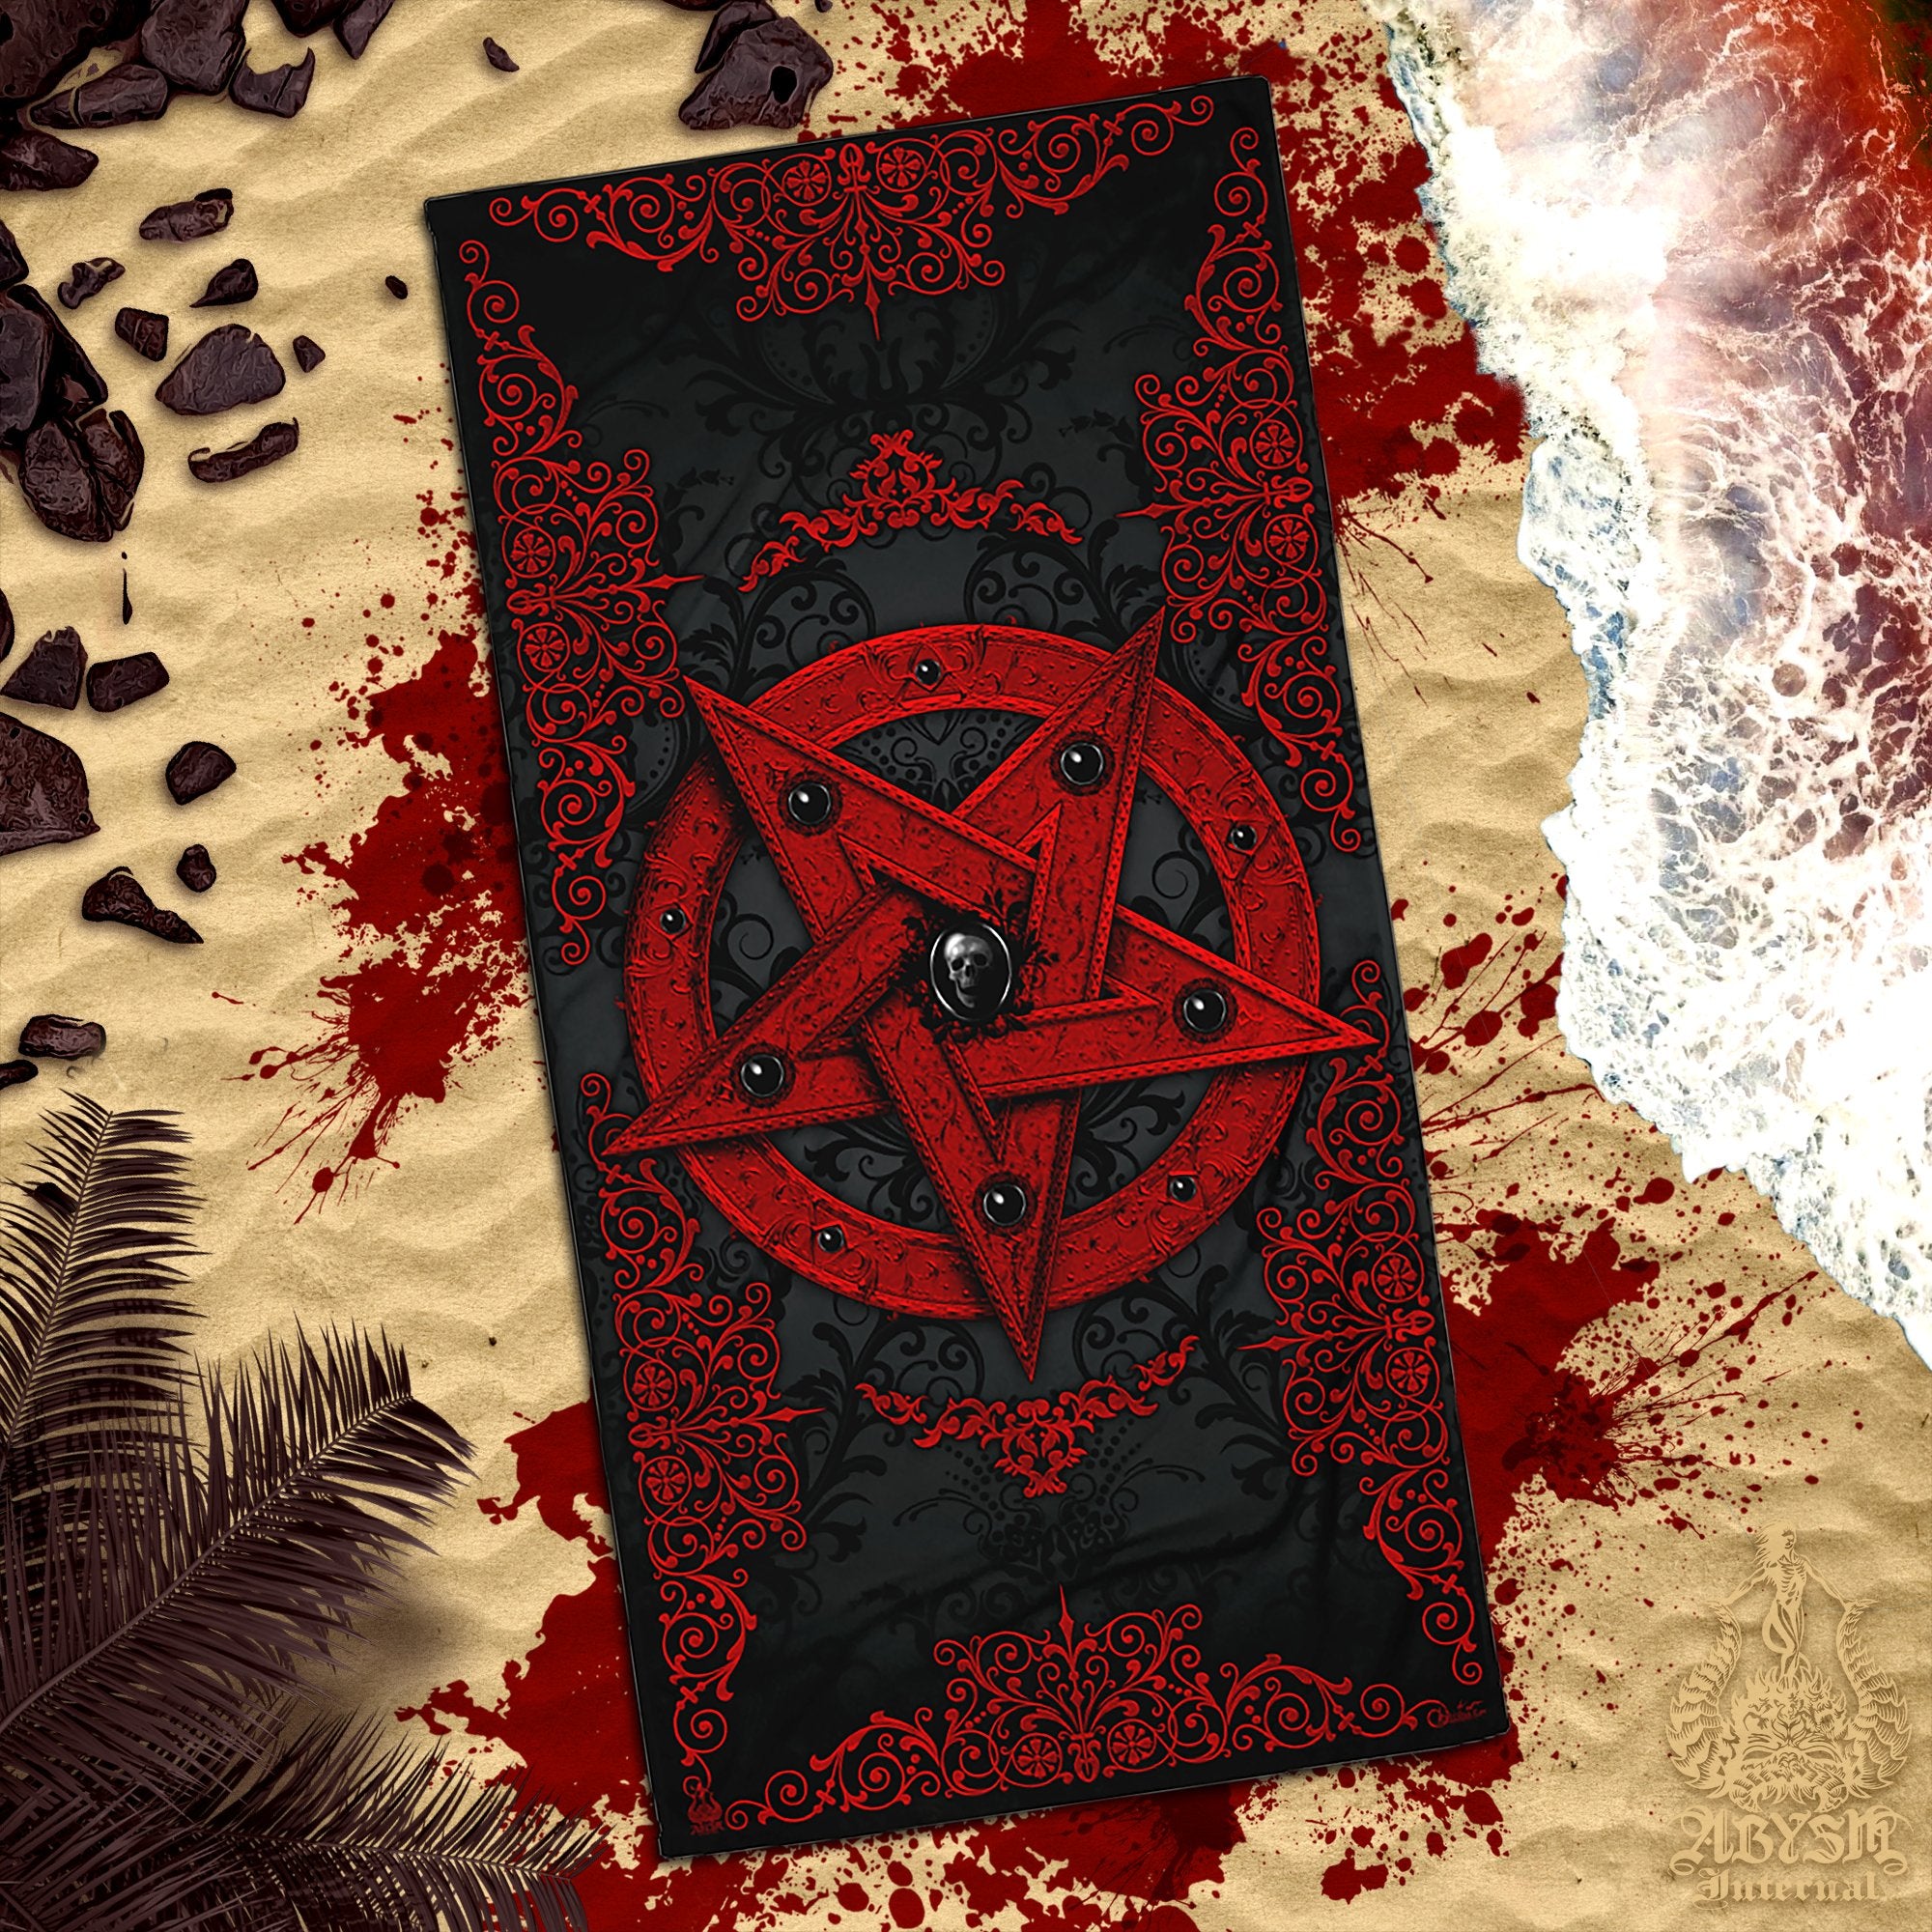 Pentagram Beach Towel, Satanic Gift - 3 Colors, Red, Silver and Gold - Abysm Internal